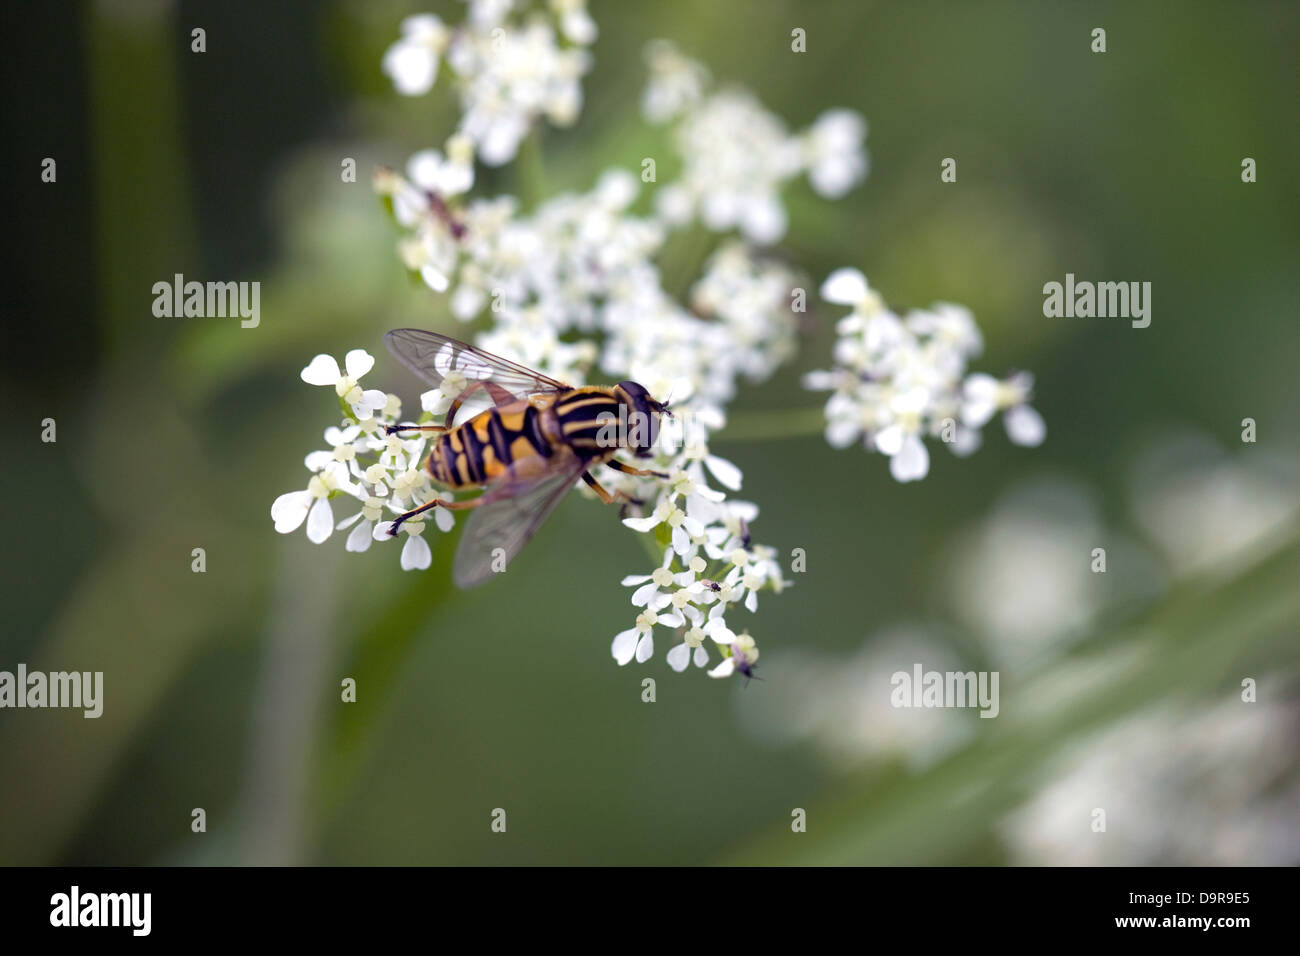 Hoverfly on flowers of wild plant Stock Photo